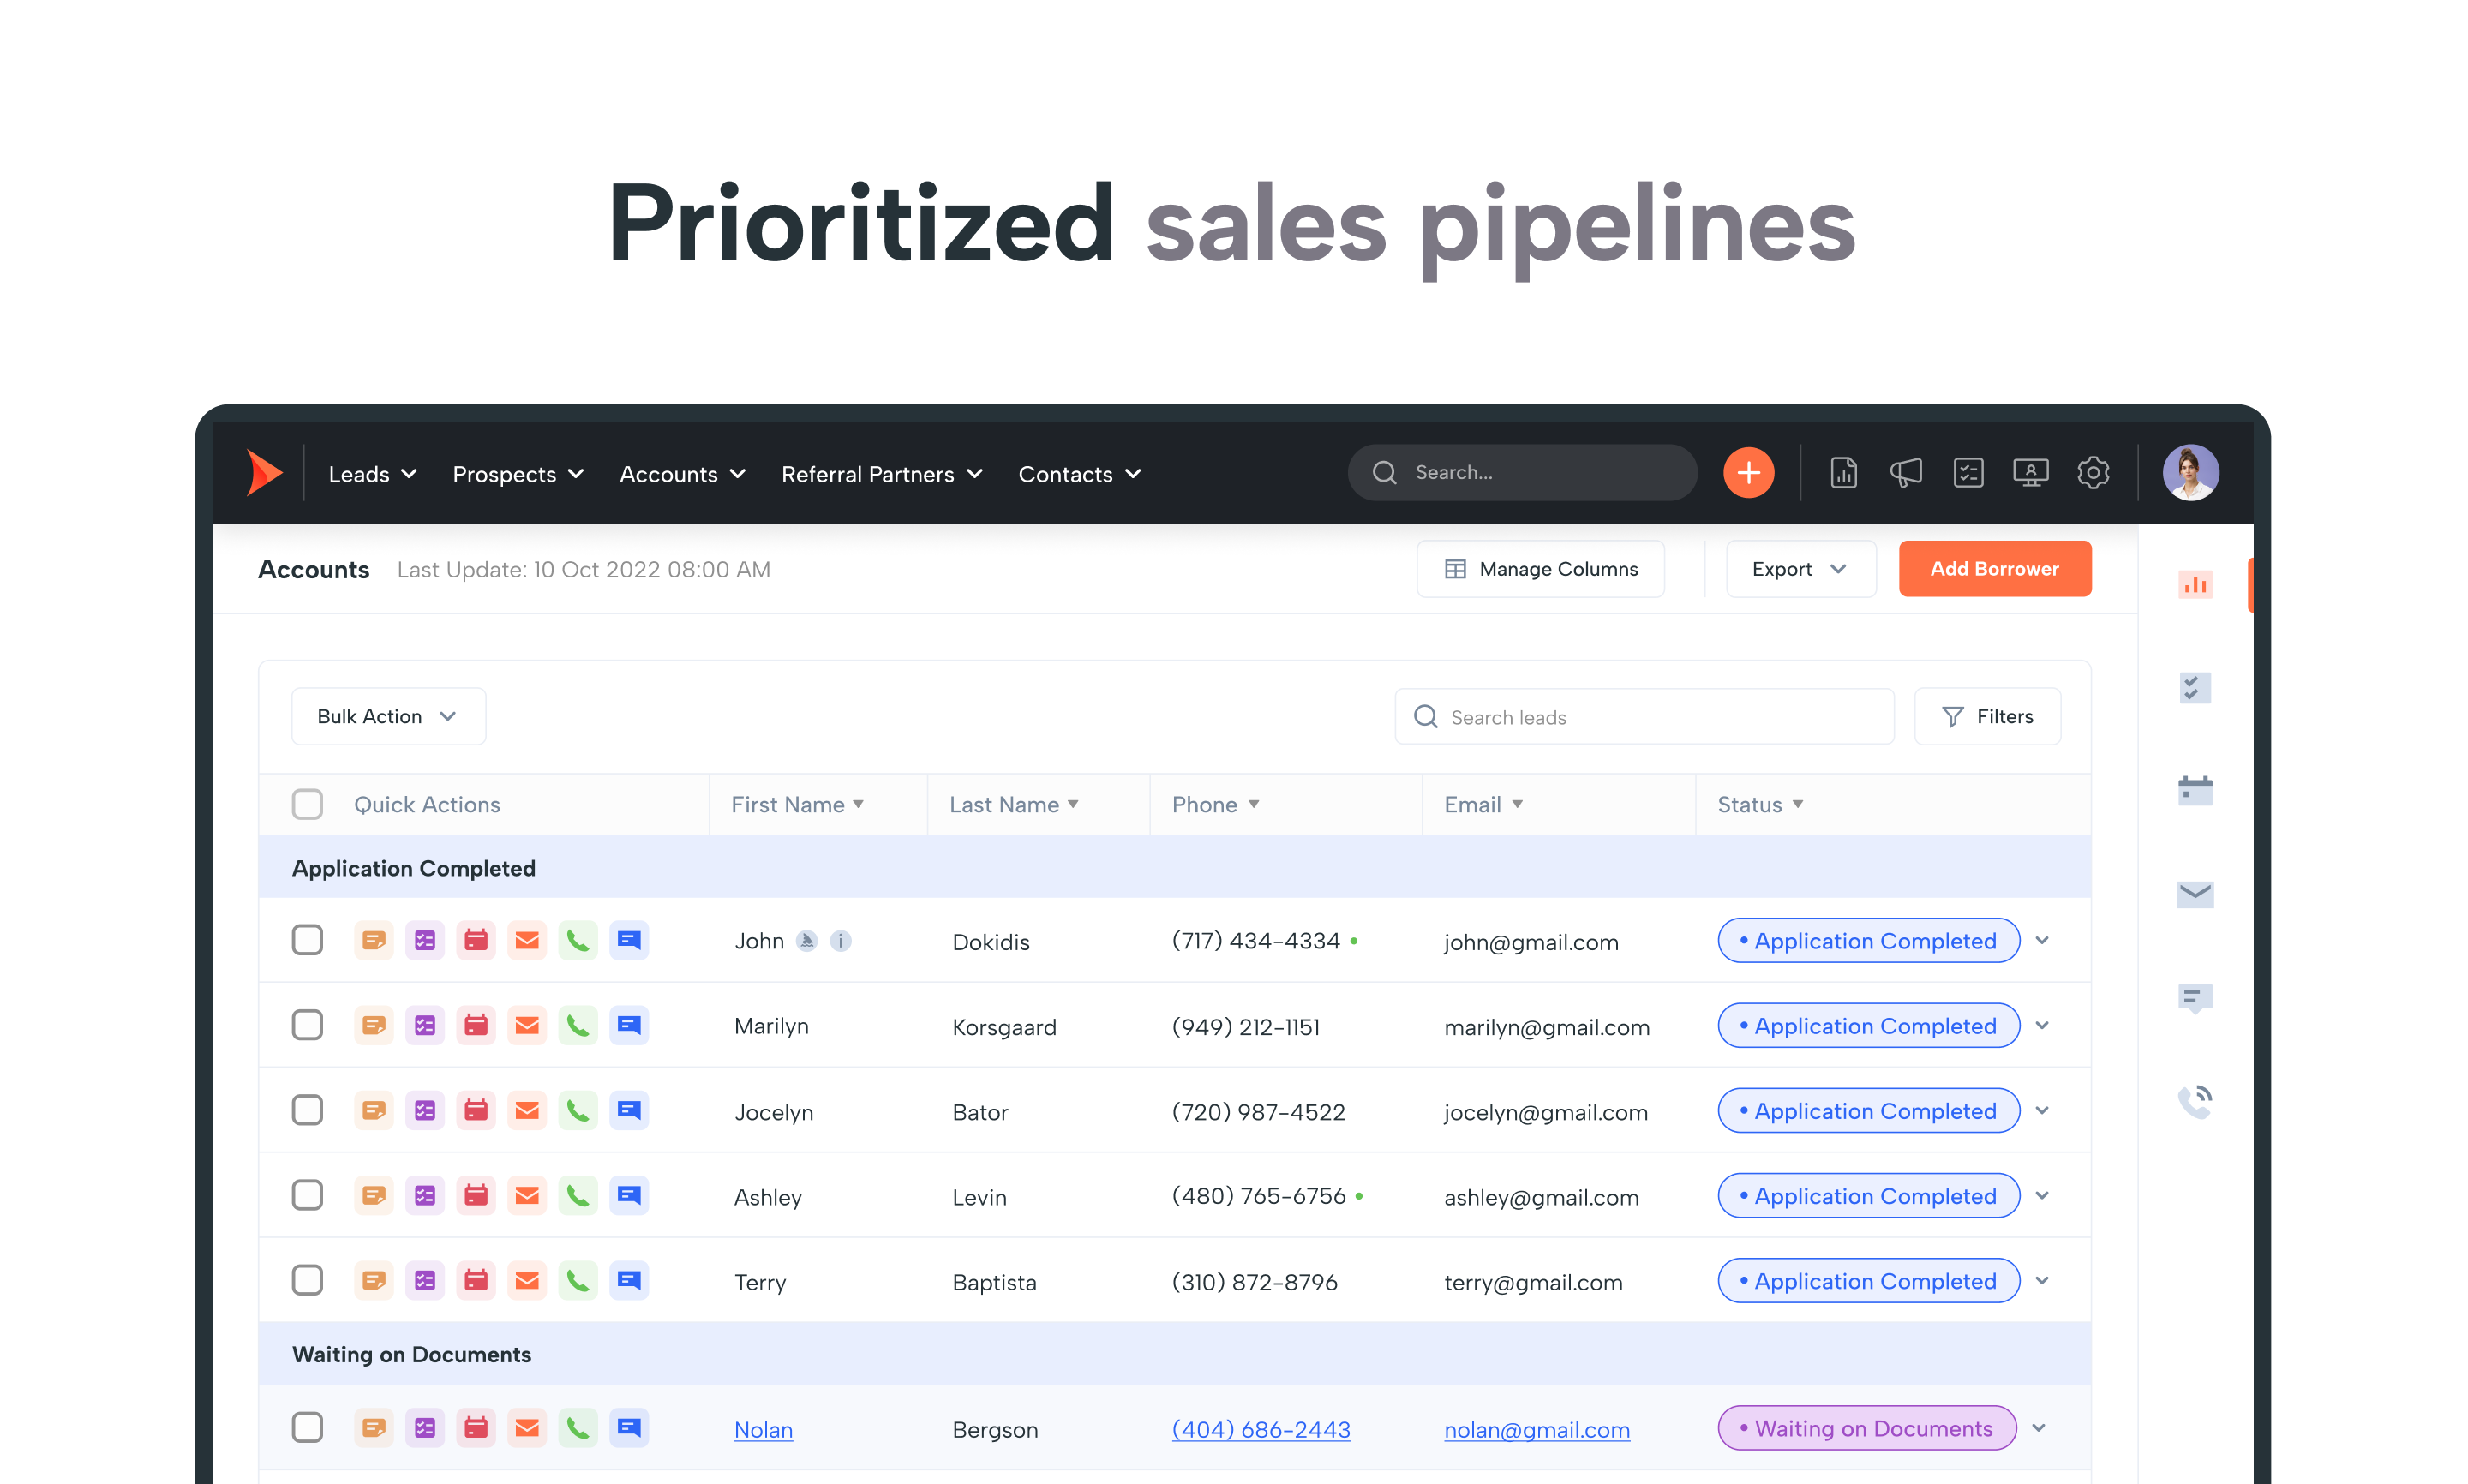 Shape Software - Prioritized Sales Pipelines